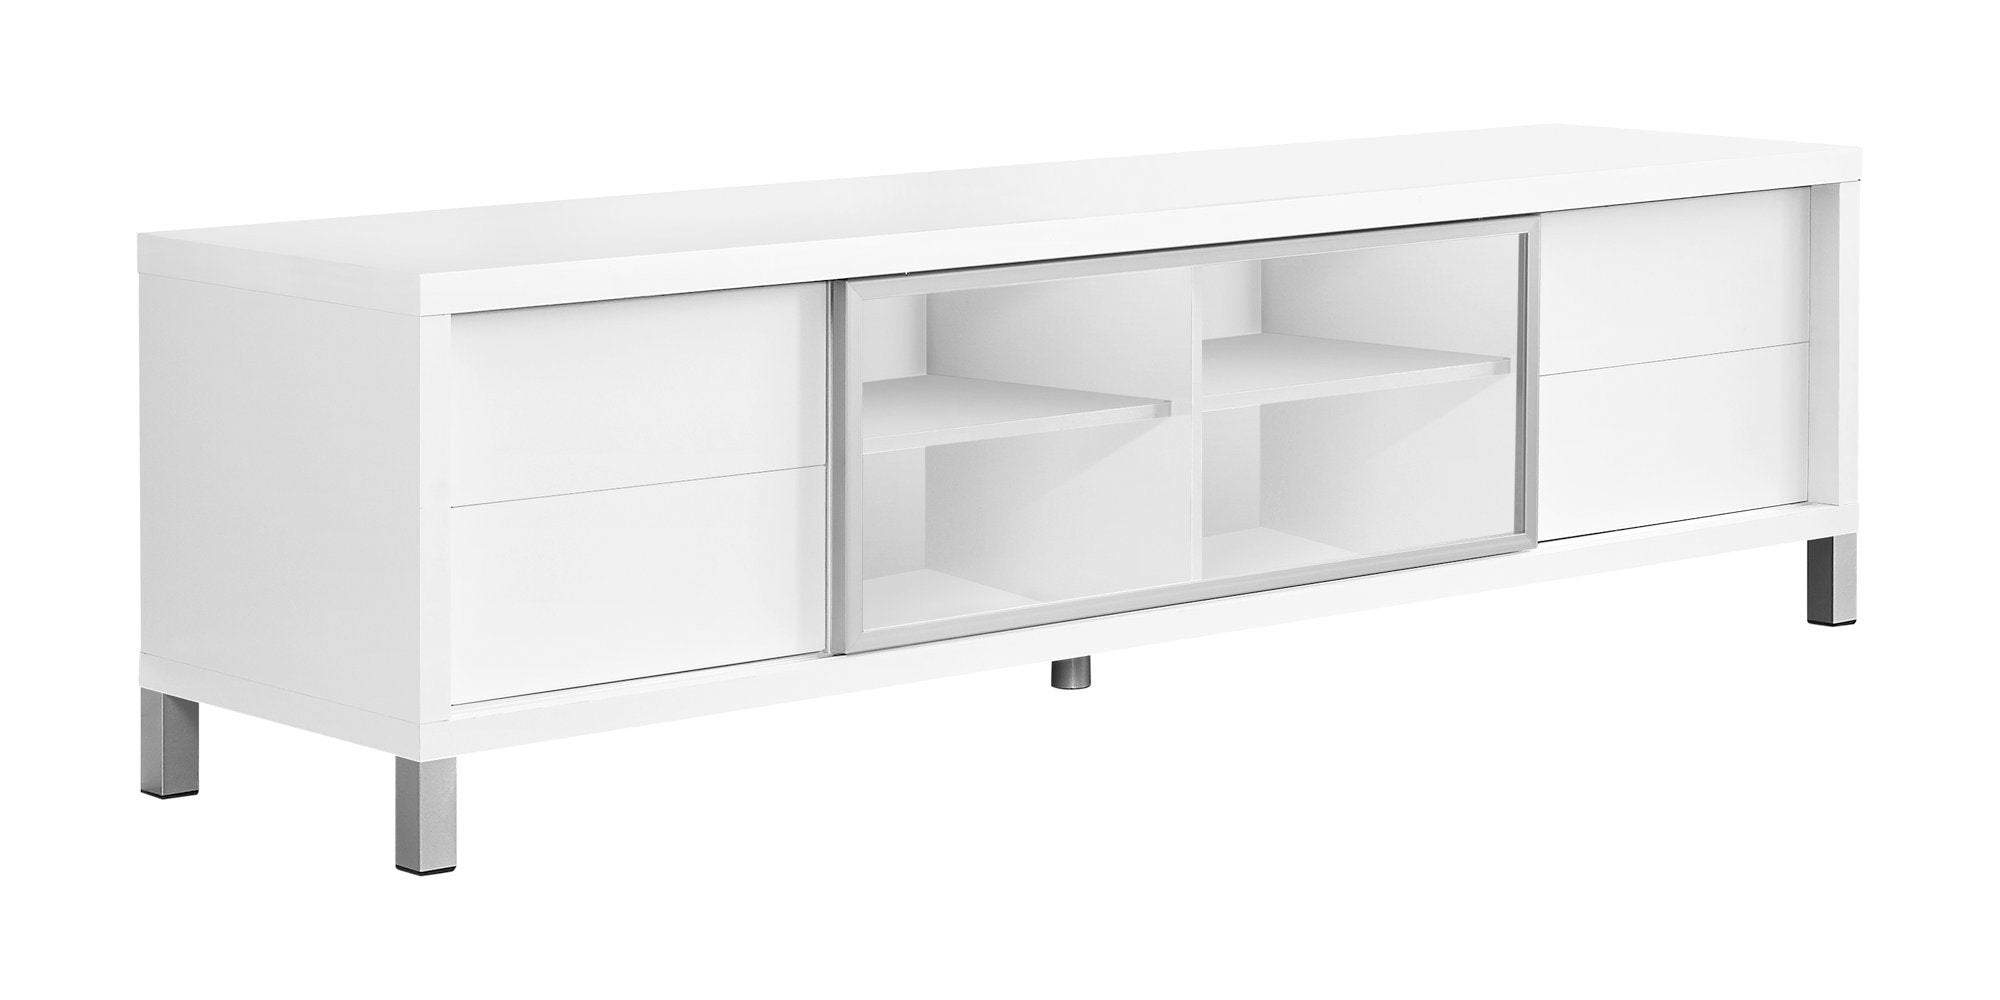 MN-542537    Tv Stand, 71 Inch, Console, Media Entertainment Center, Storage Cabinet, Living Room, Bedroom, Laminate, White, Contemporary, Modern